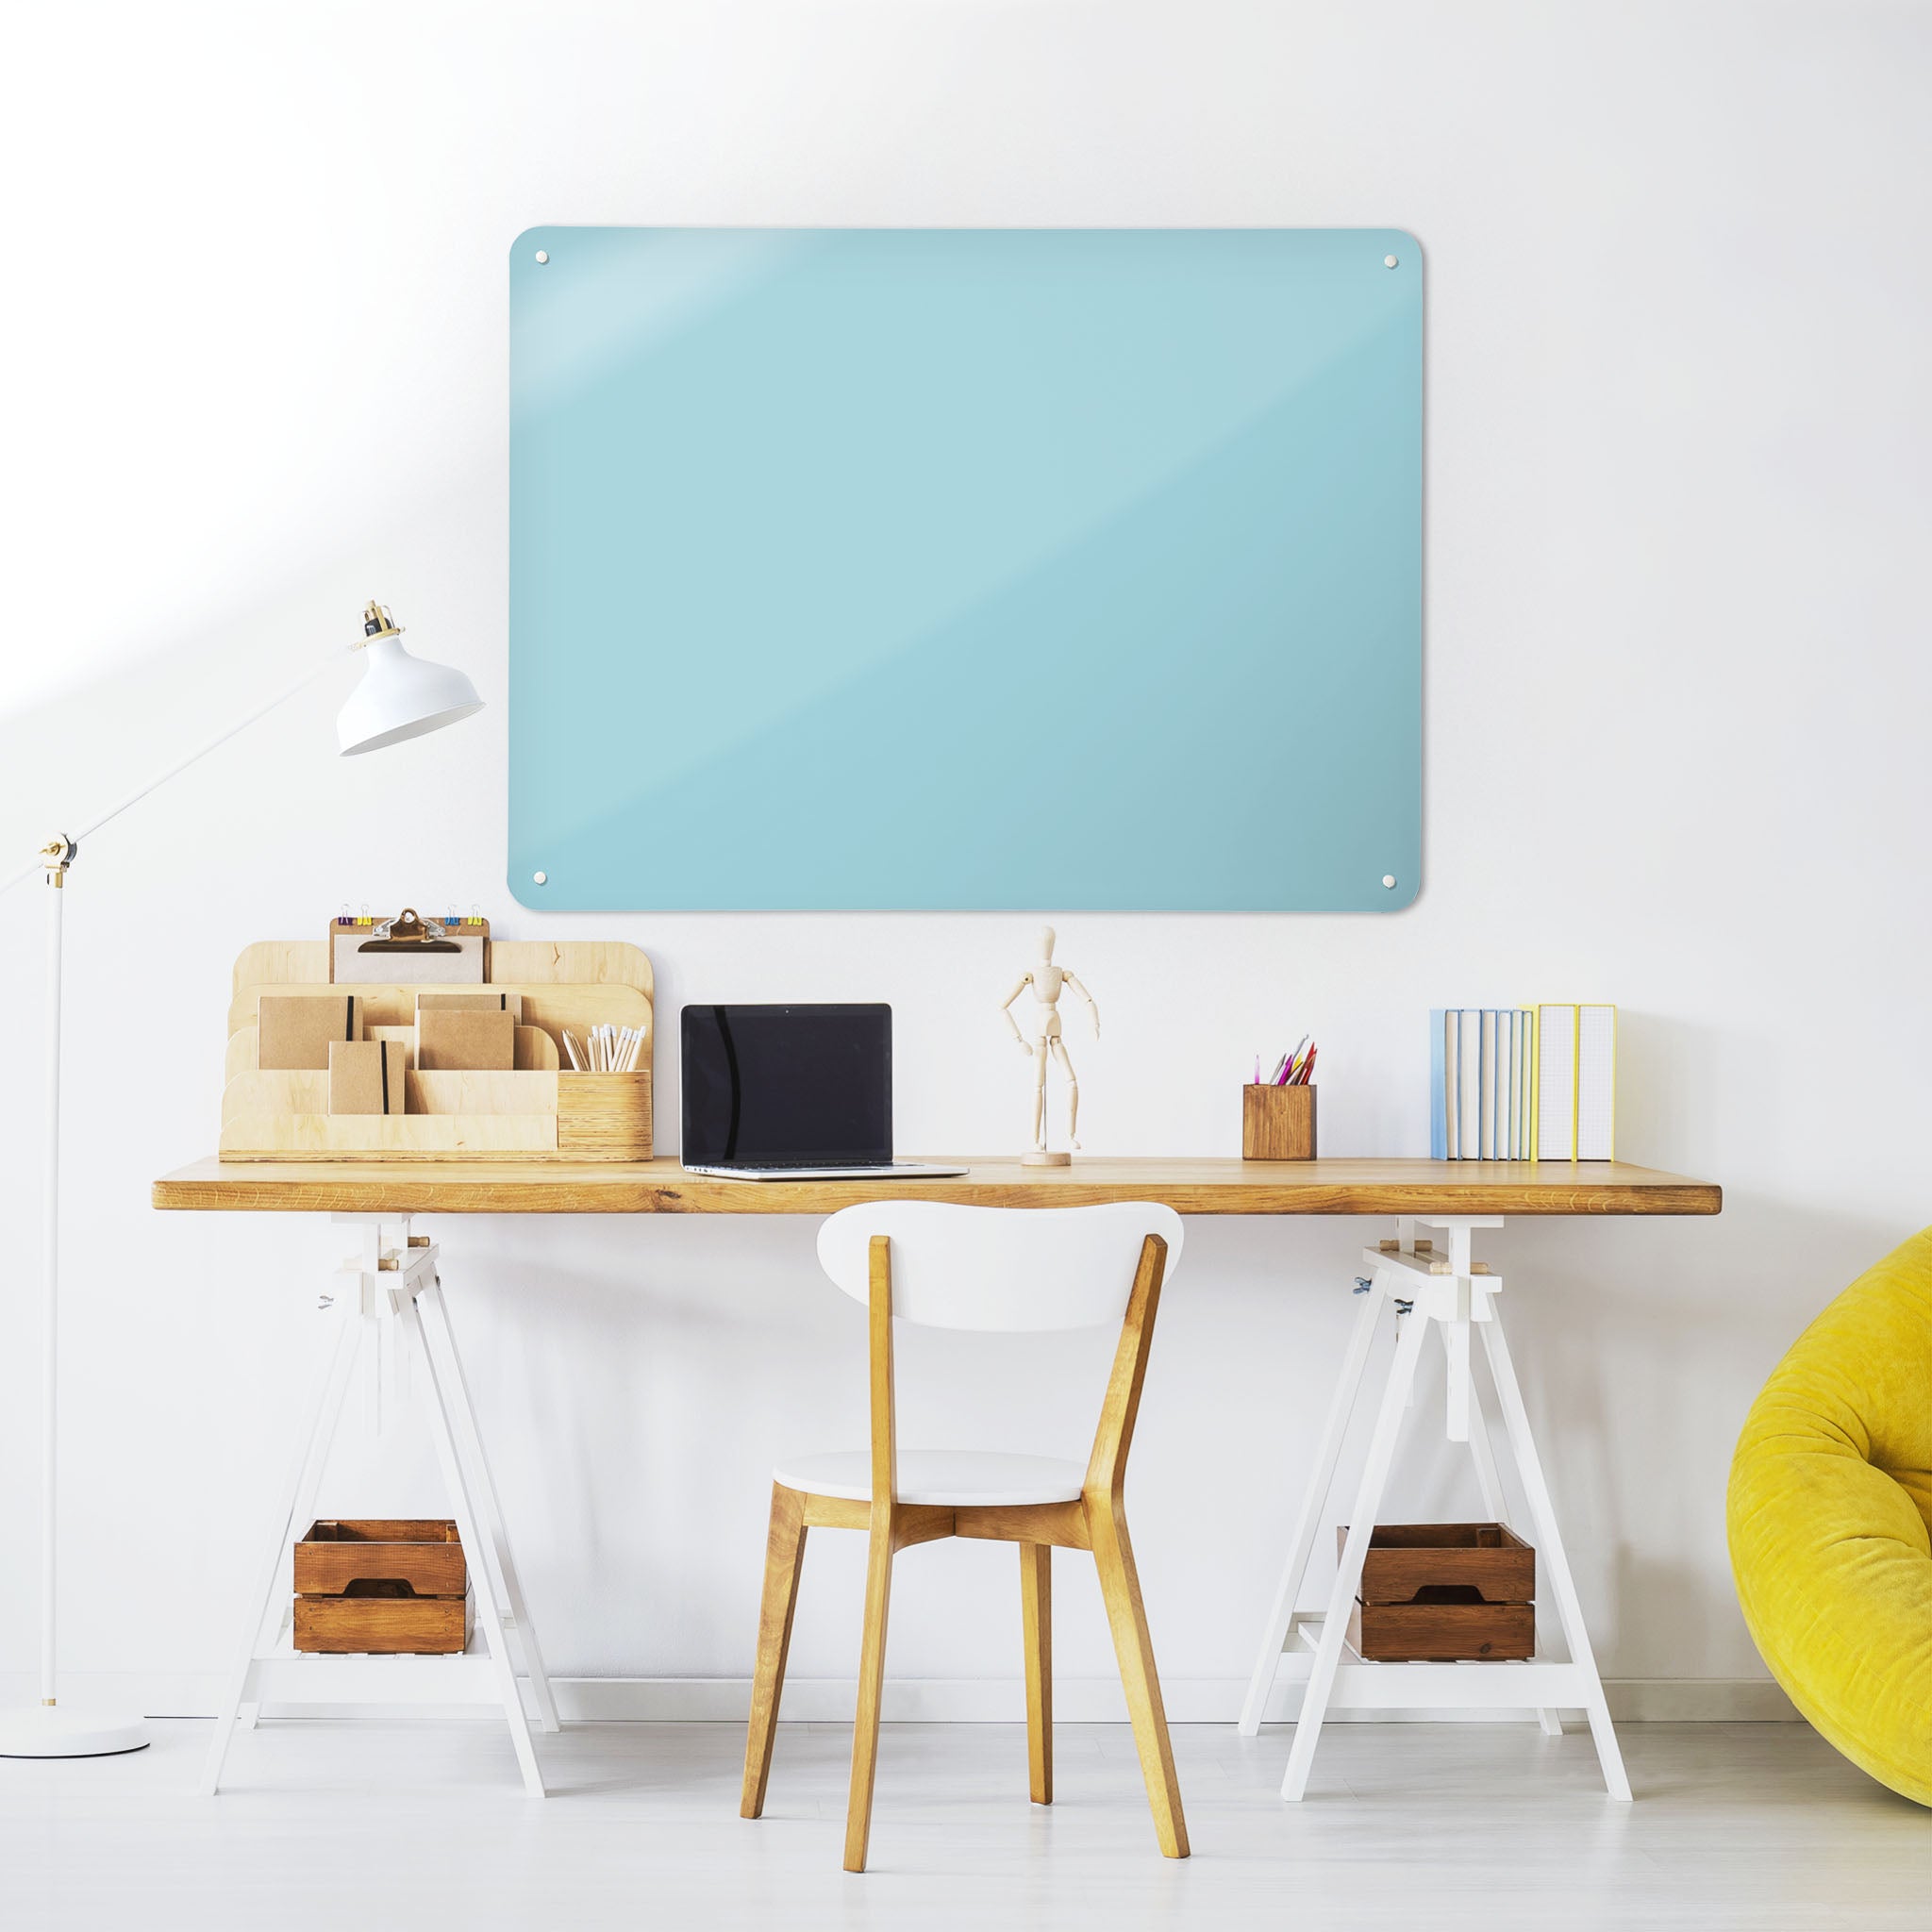 A desk in a workspace setting in a white interior with a plain blue coloured magnetic metal wall art panel 